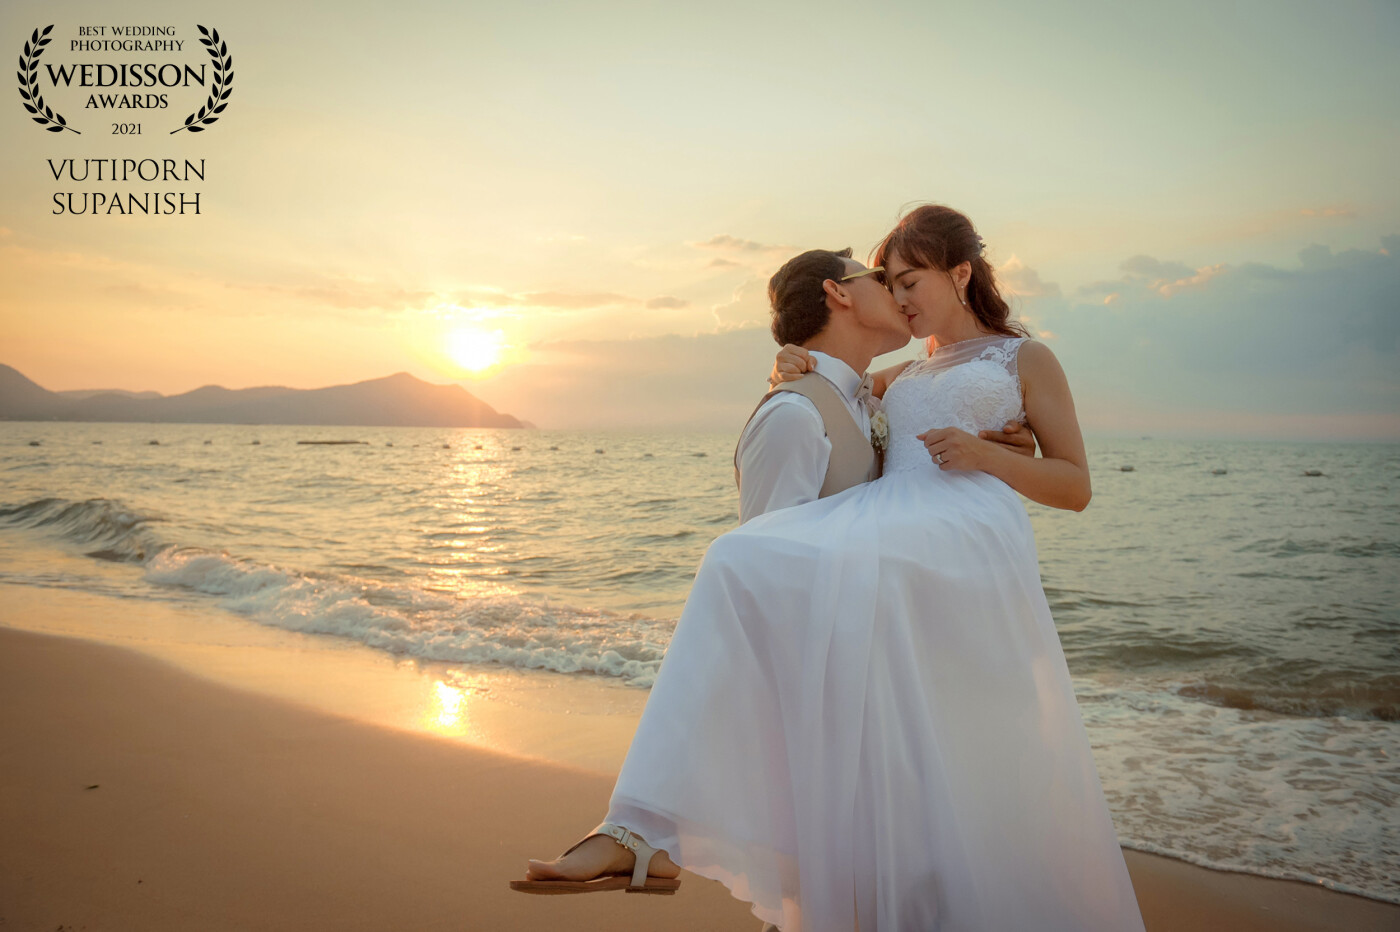 It's one of my very cute newlyweds. The couple flew back from the Middle East to catch the sunset with a sandy beach wedding. You deserve it. Then the vision of their dreams had actually come true.